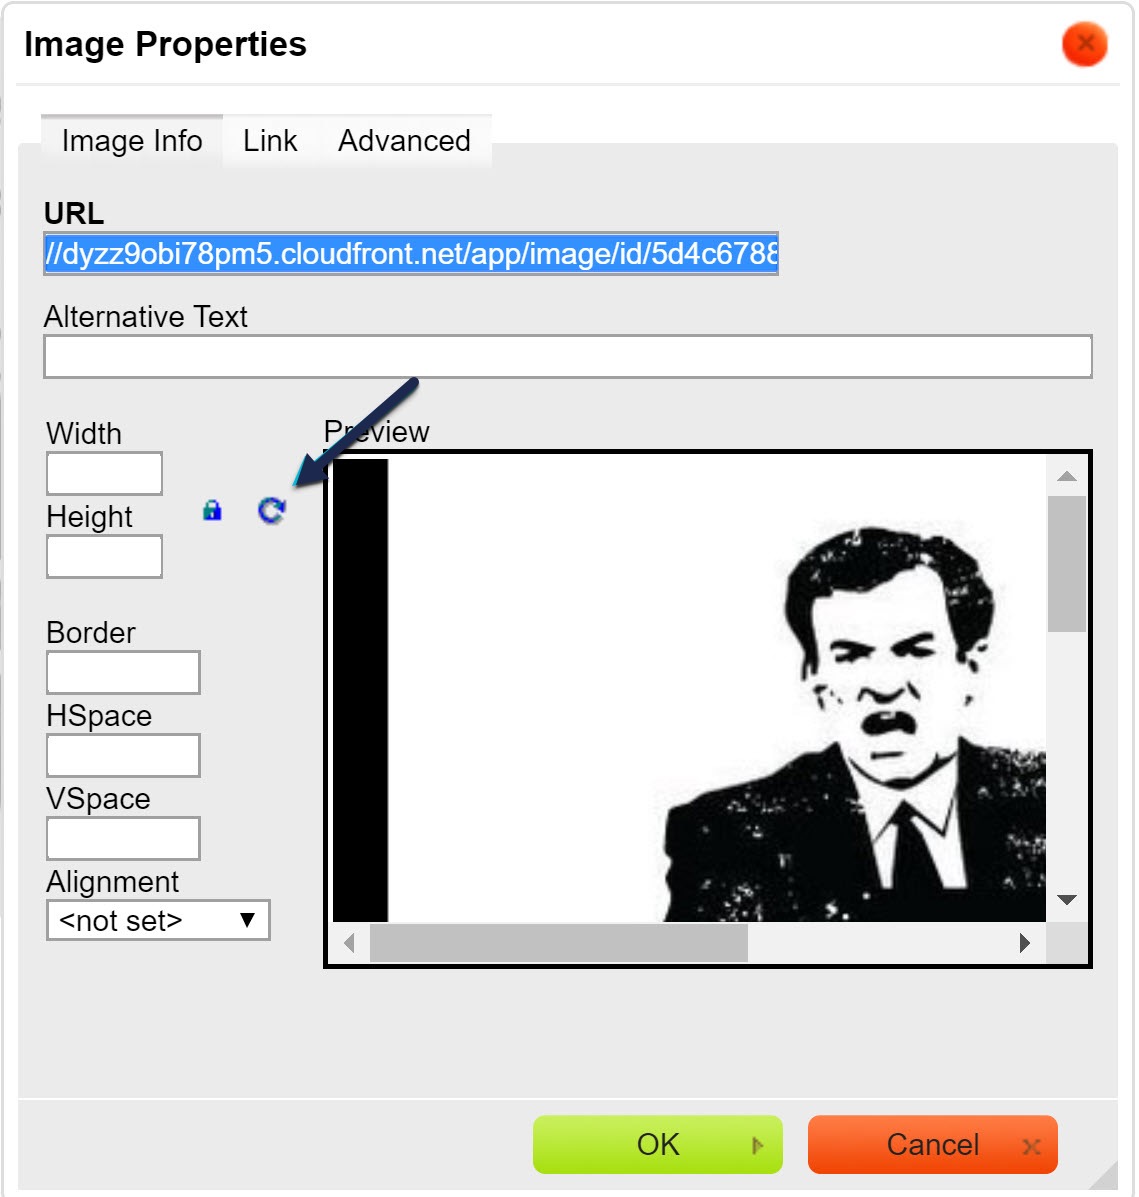 Screenshot showing the Image Properties pop-up, with a callout to the refresh arrow next to the Width and Height